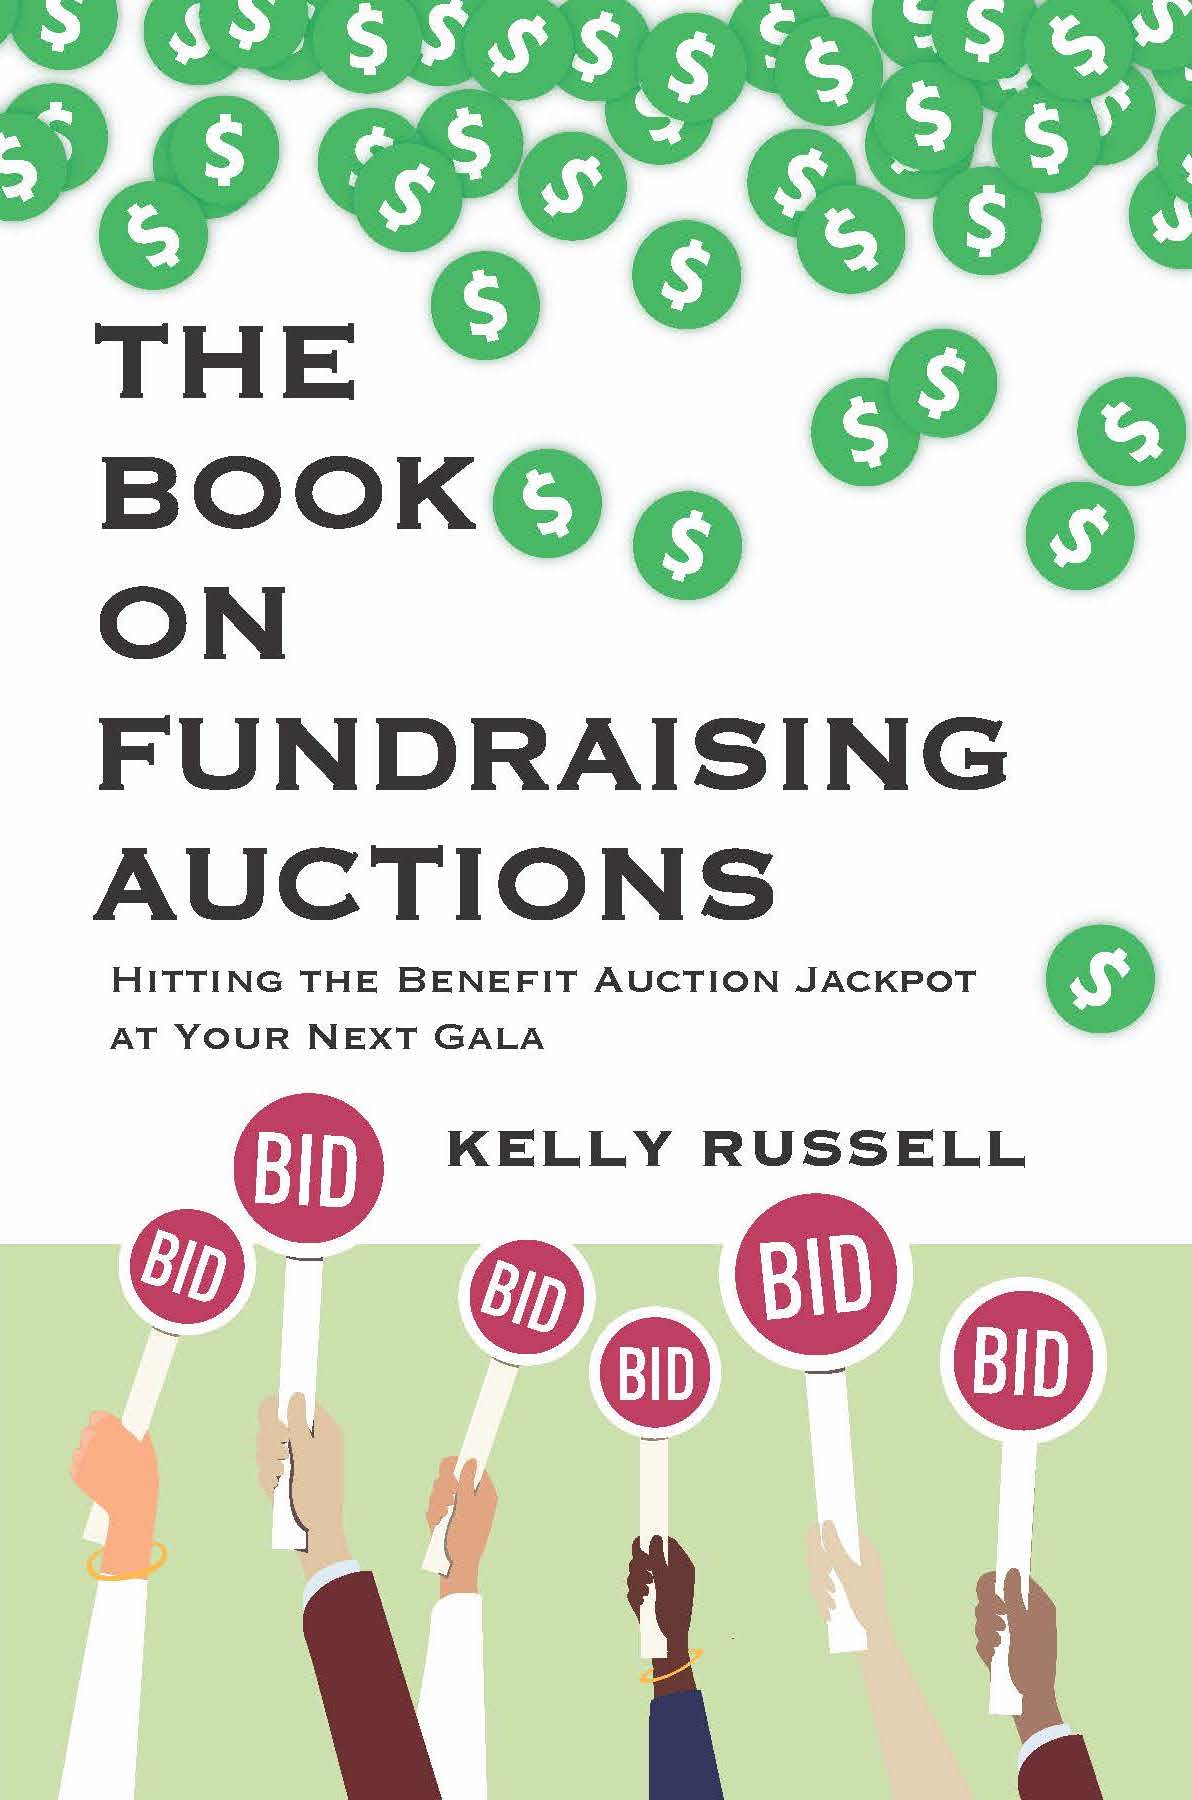 The Book on Fundraising Auctions: Hitting the Benefit Auction Jackpot at Your Next Gala